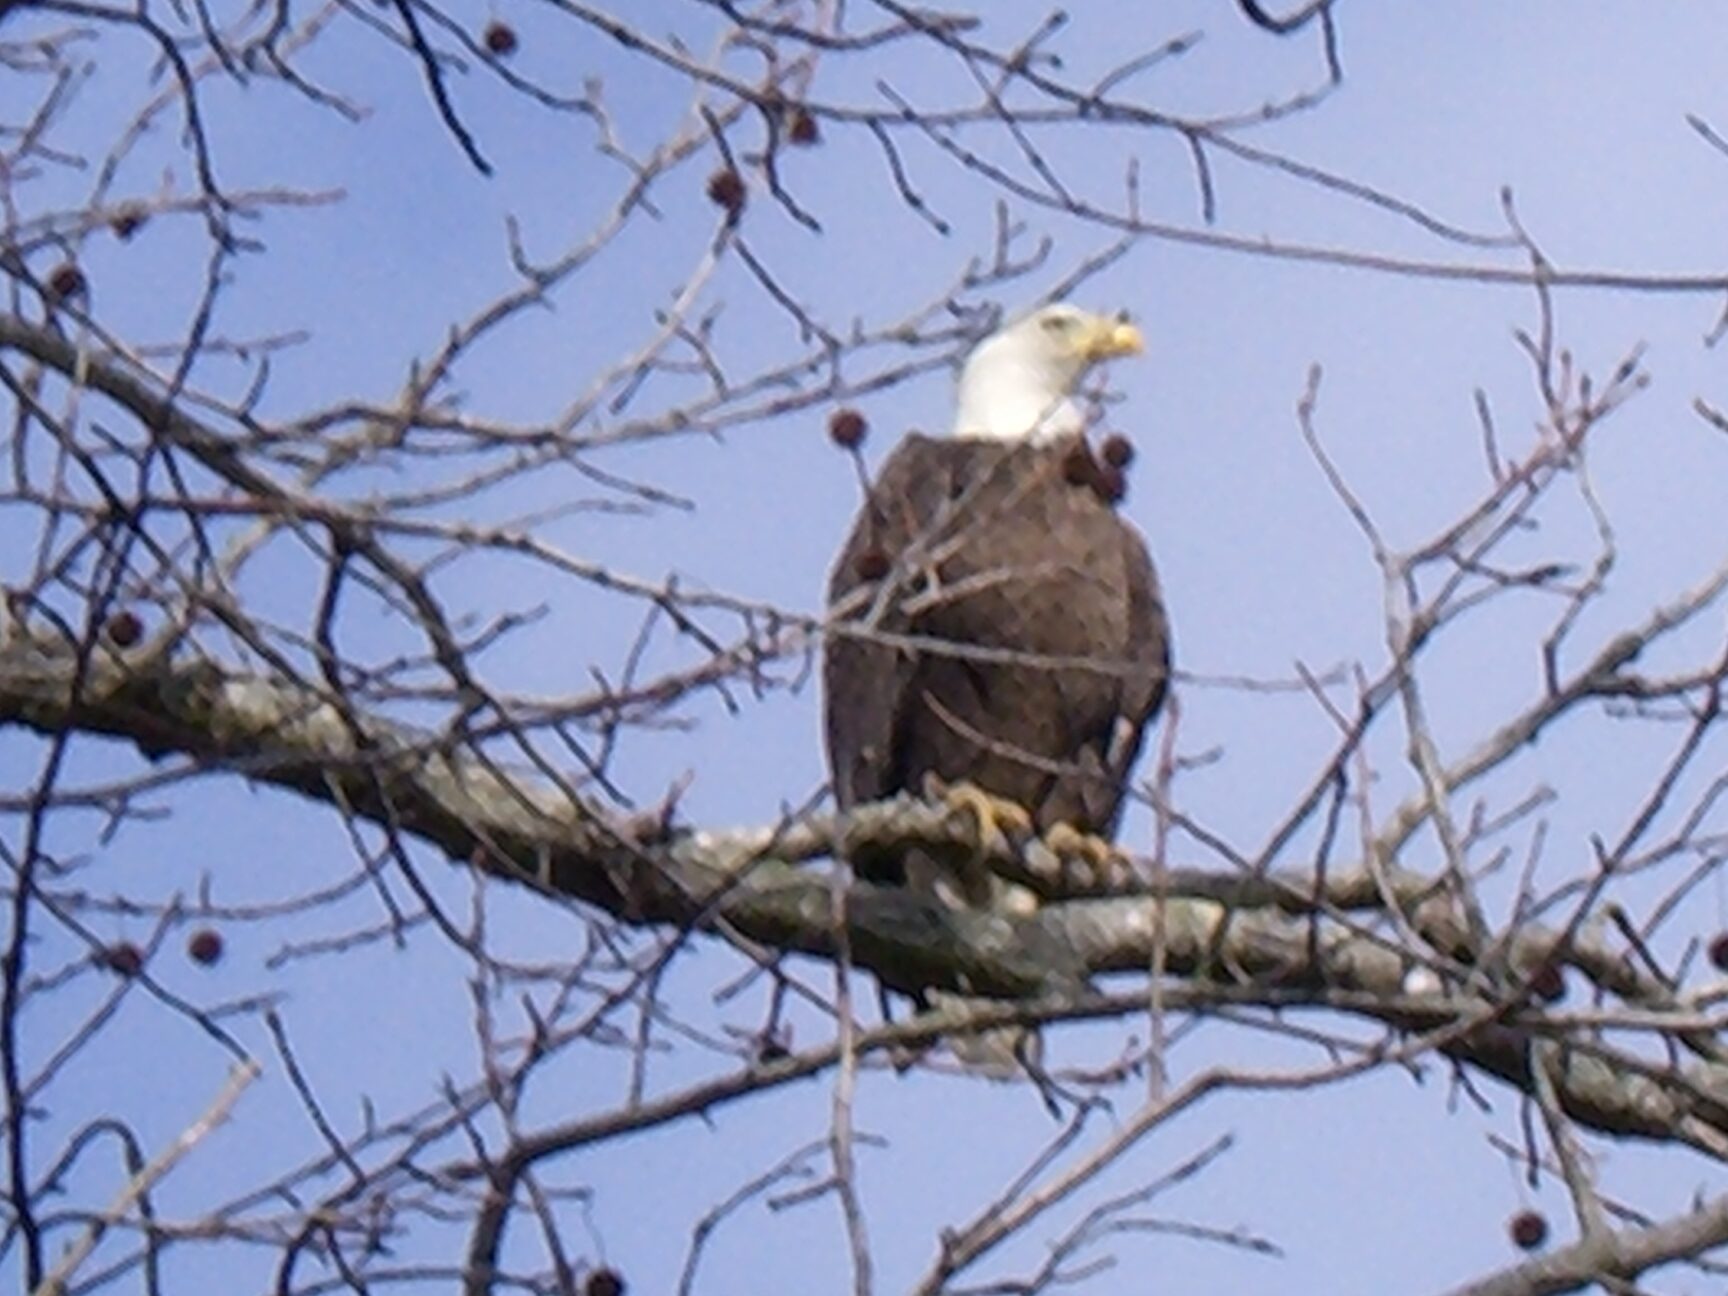 Bald Eagle on the property grounds